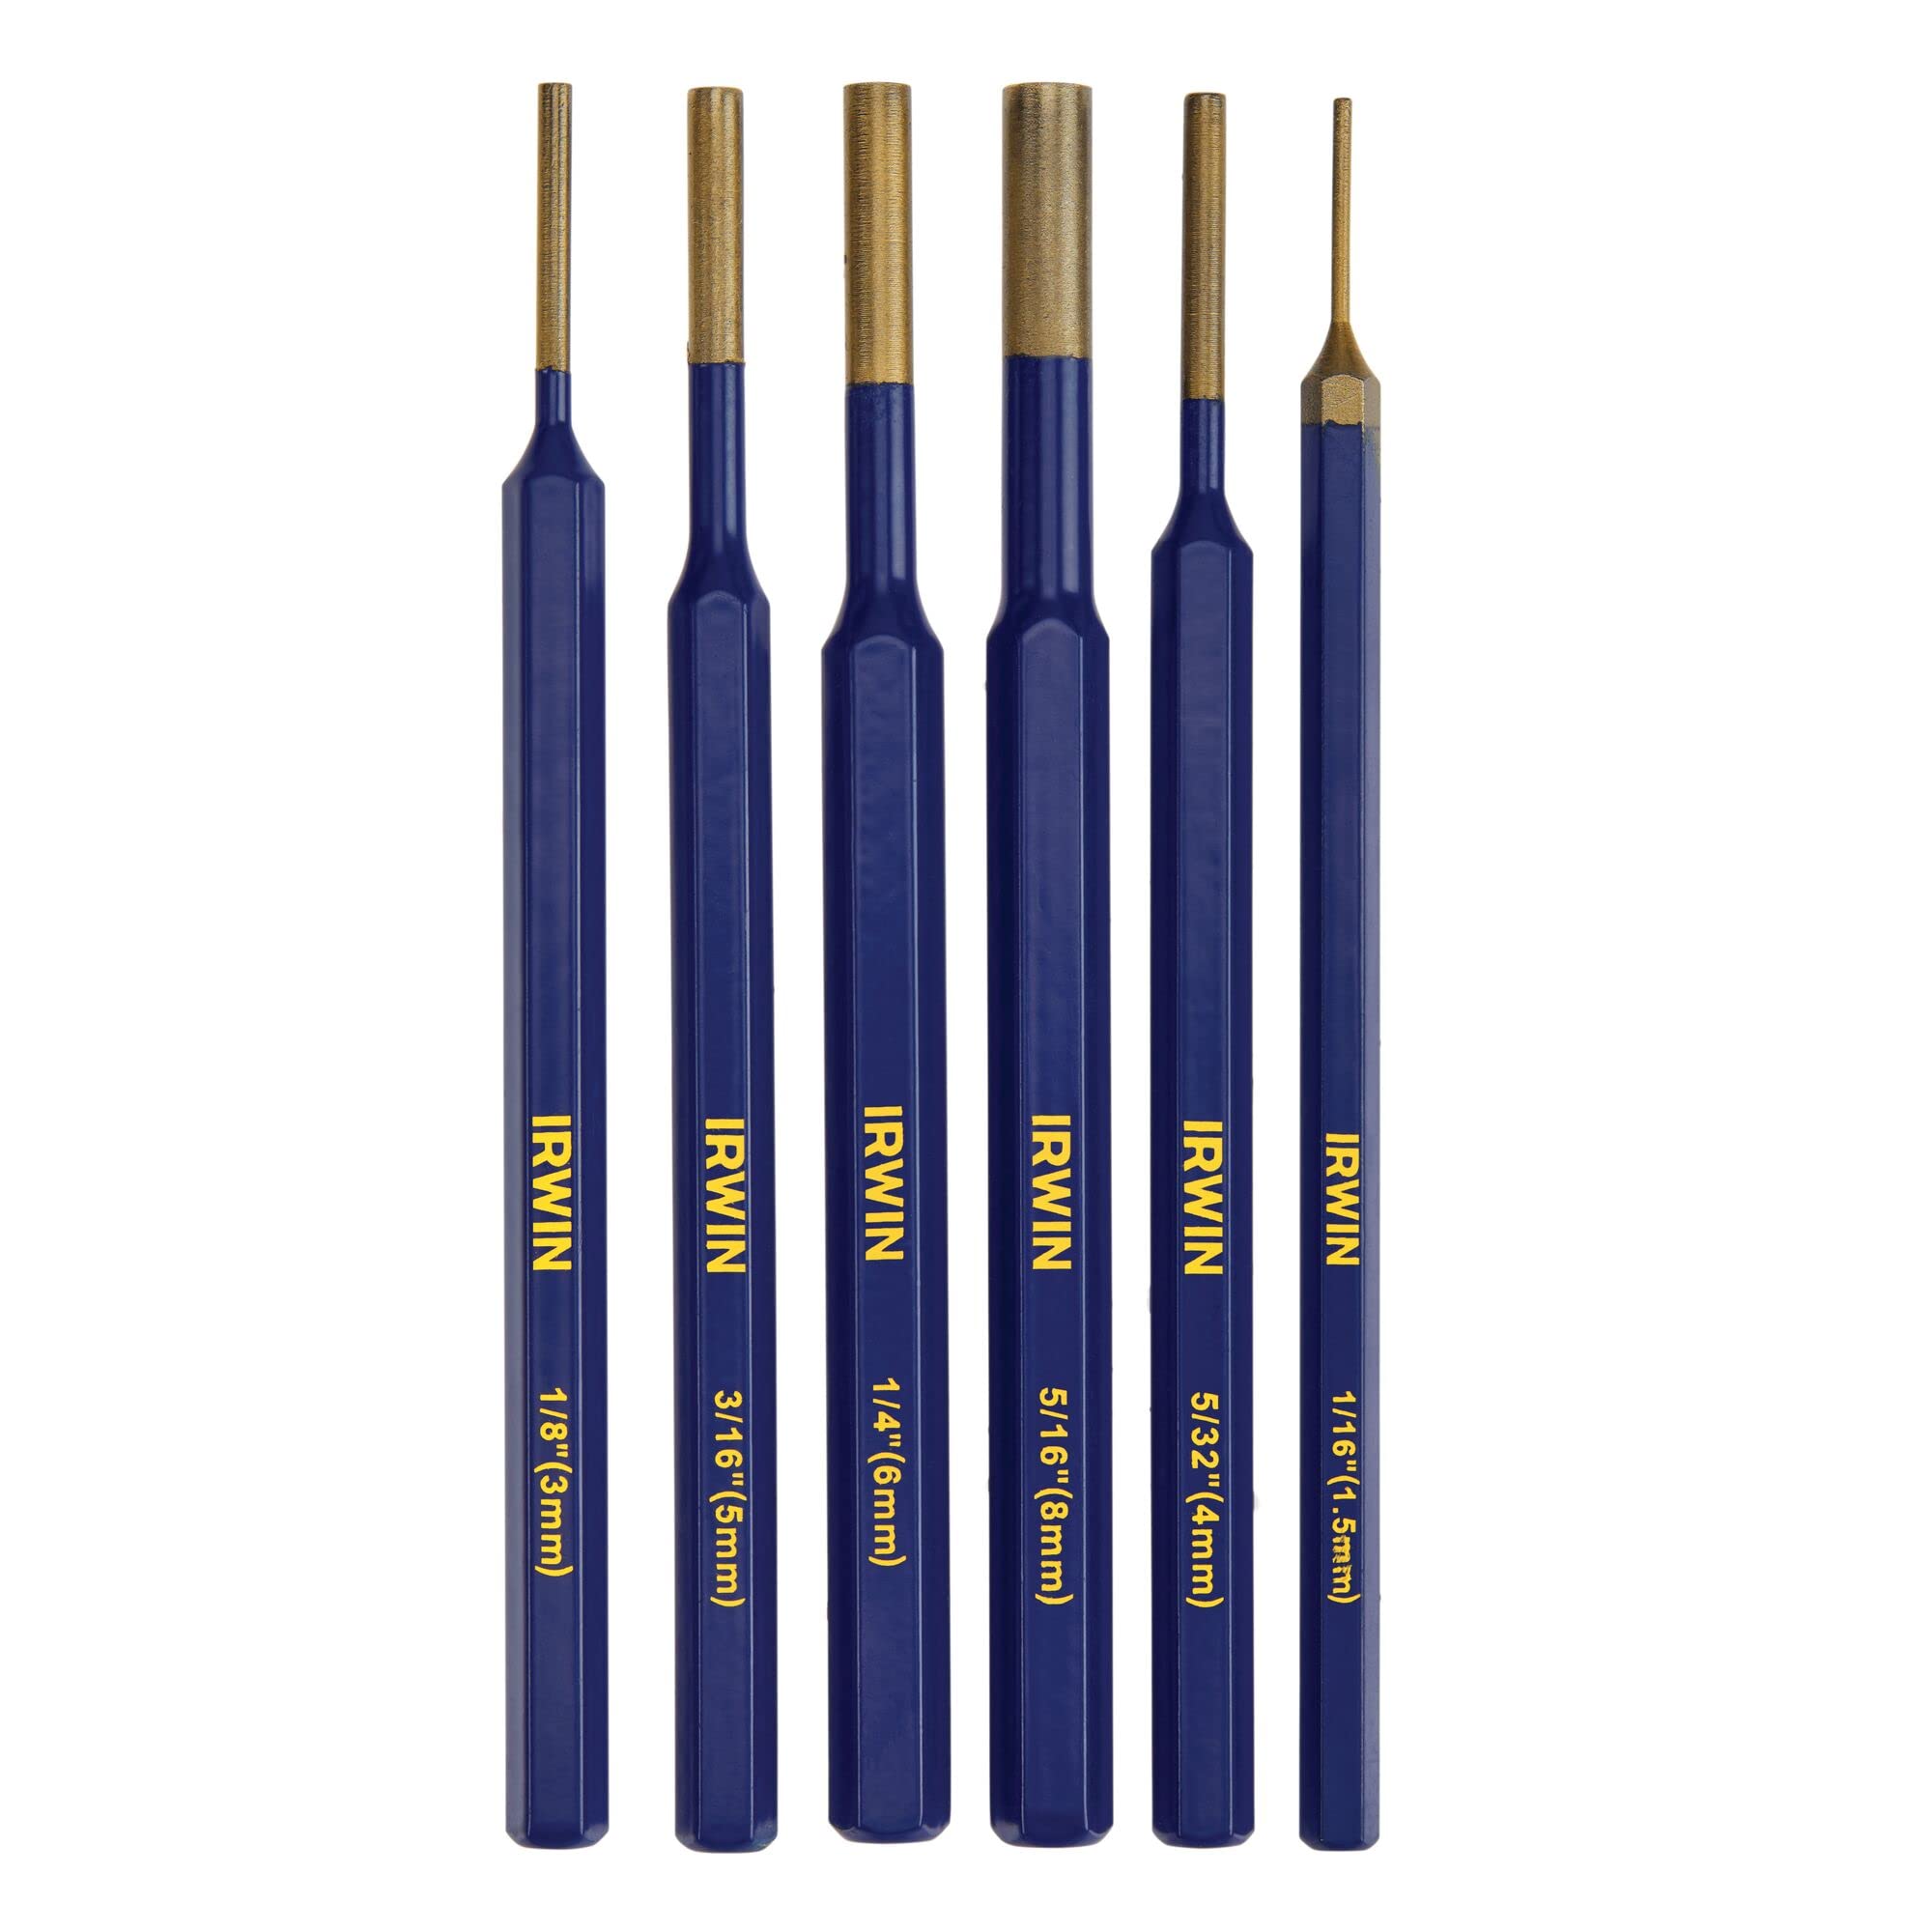 IRWIN Punch Set, 6-Pack with Various Sizes, Tempered for Durability (IRHT82531)